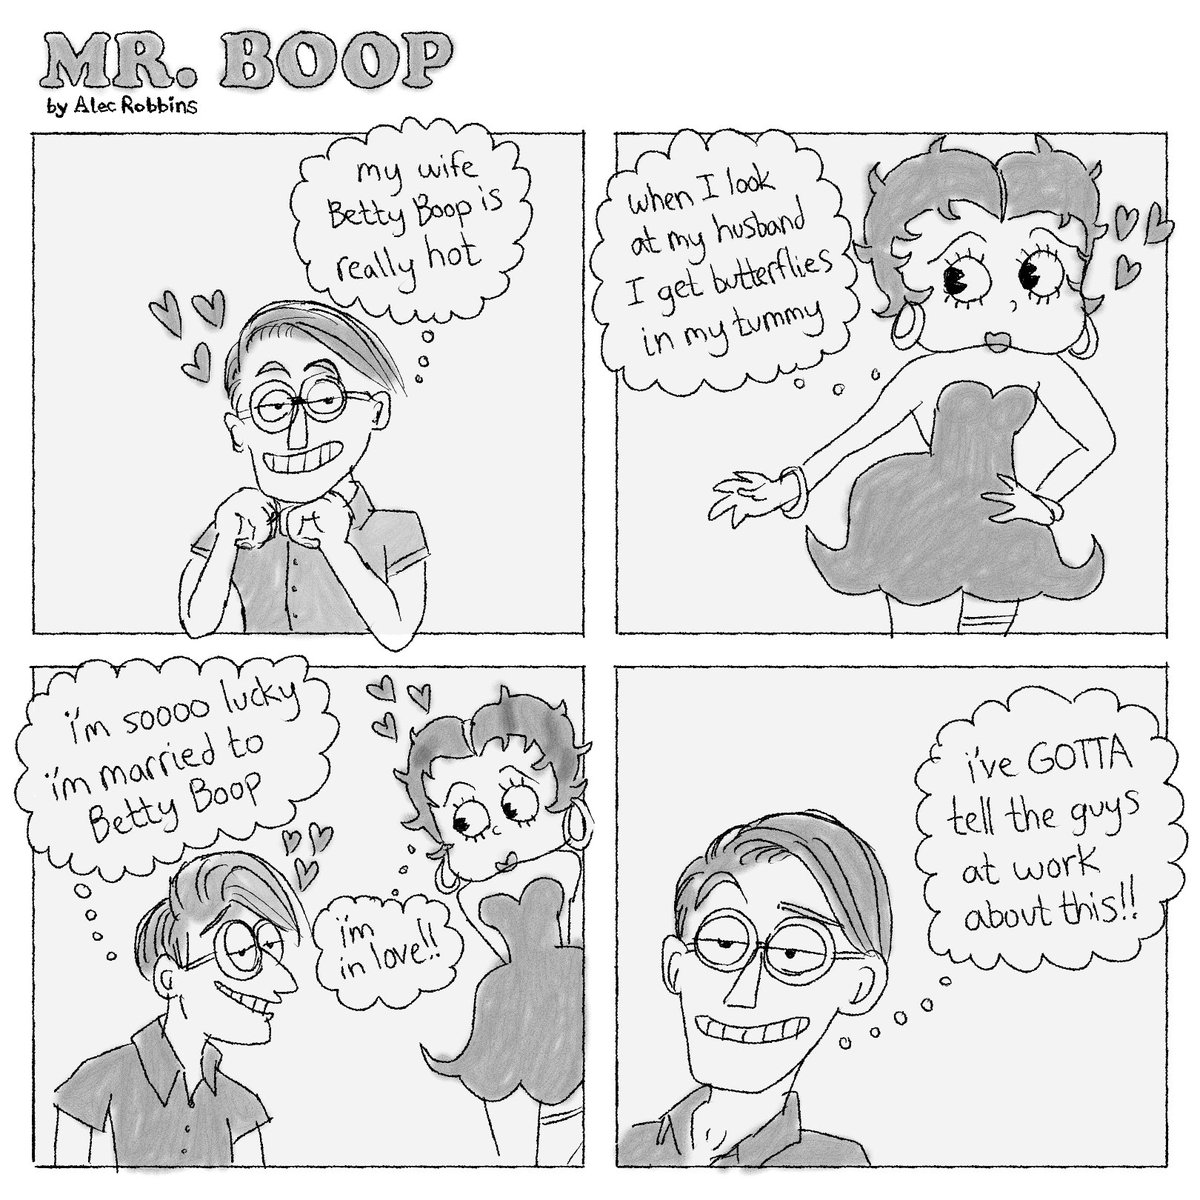 new daily comic strip i invented about what it’s like being married to Betty Boop